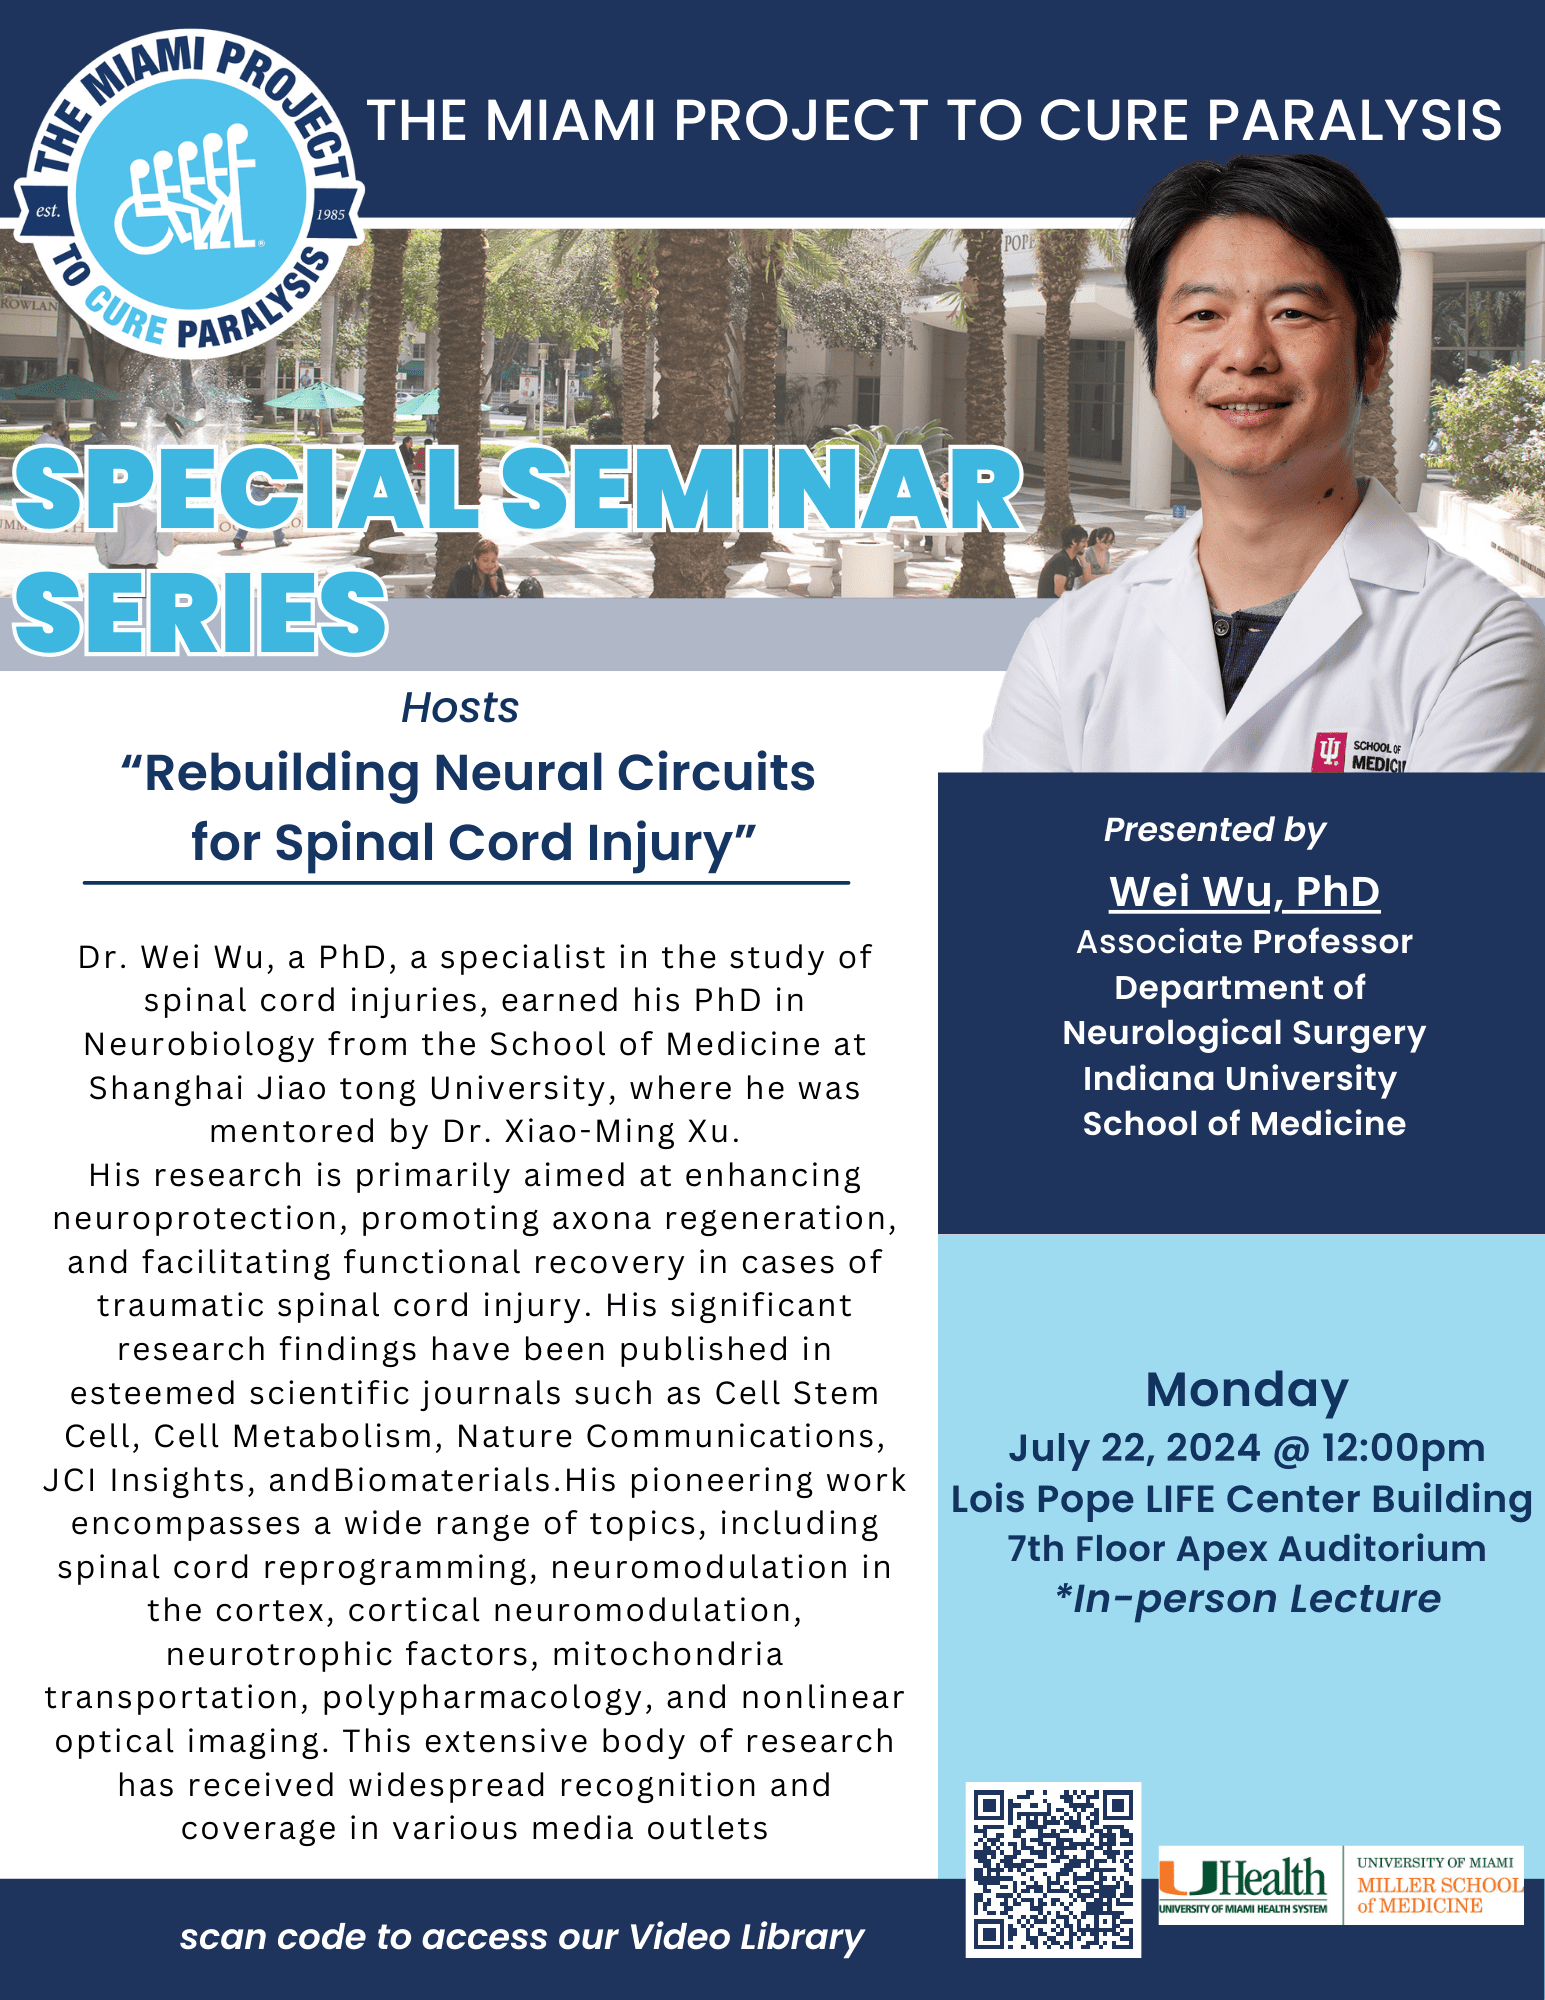 Rebuilding Neural Circuits for Spinal Cord Injury: Dr. Wei Wu